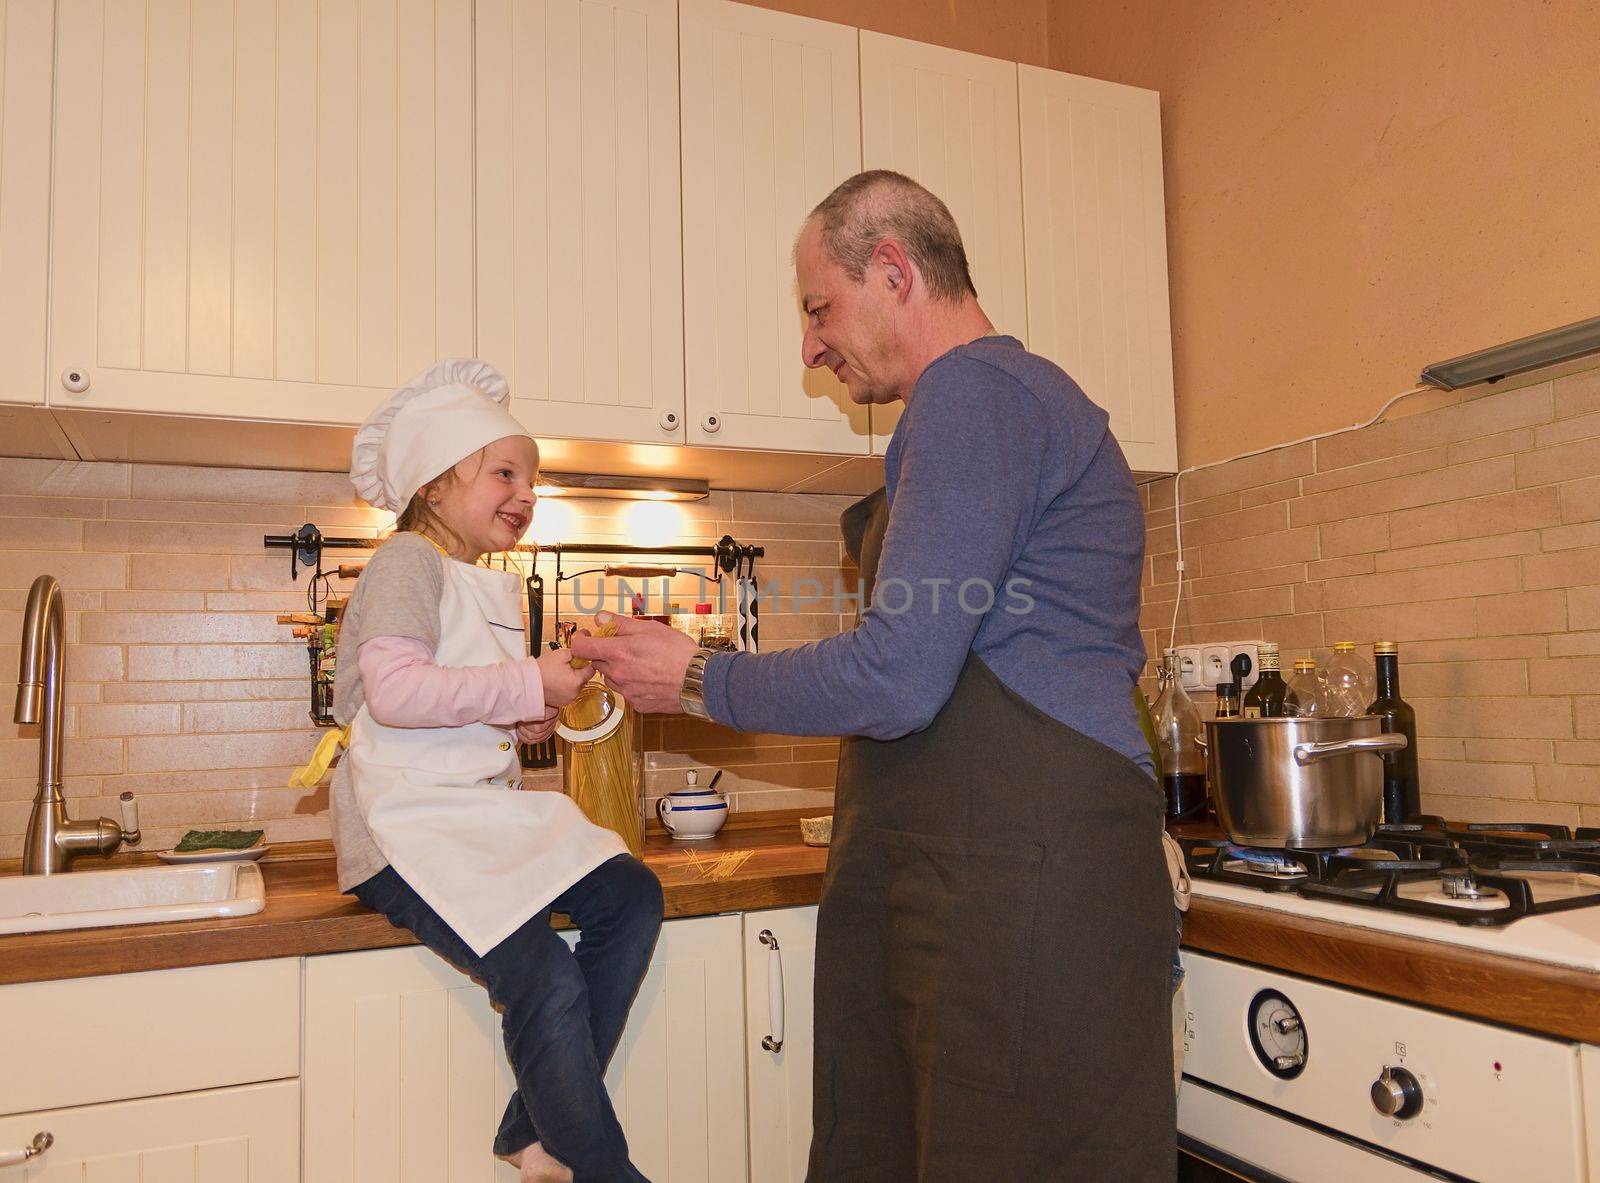 Daughter and father in the kitchen preparing spaghetti to dinner by roman_nerud